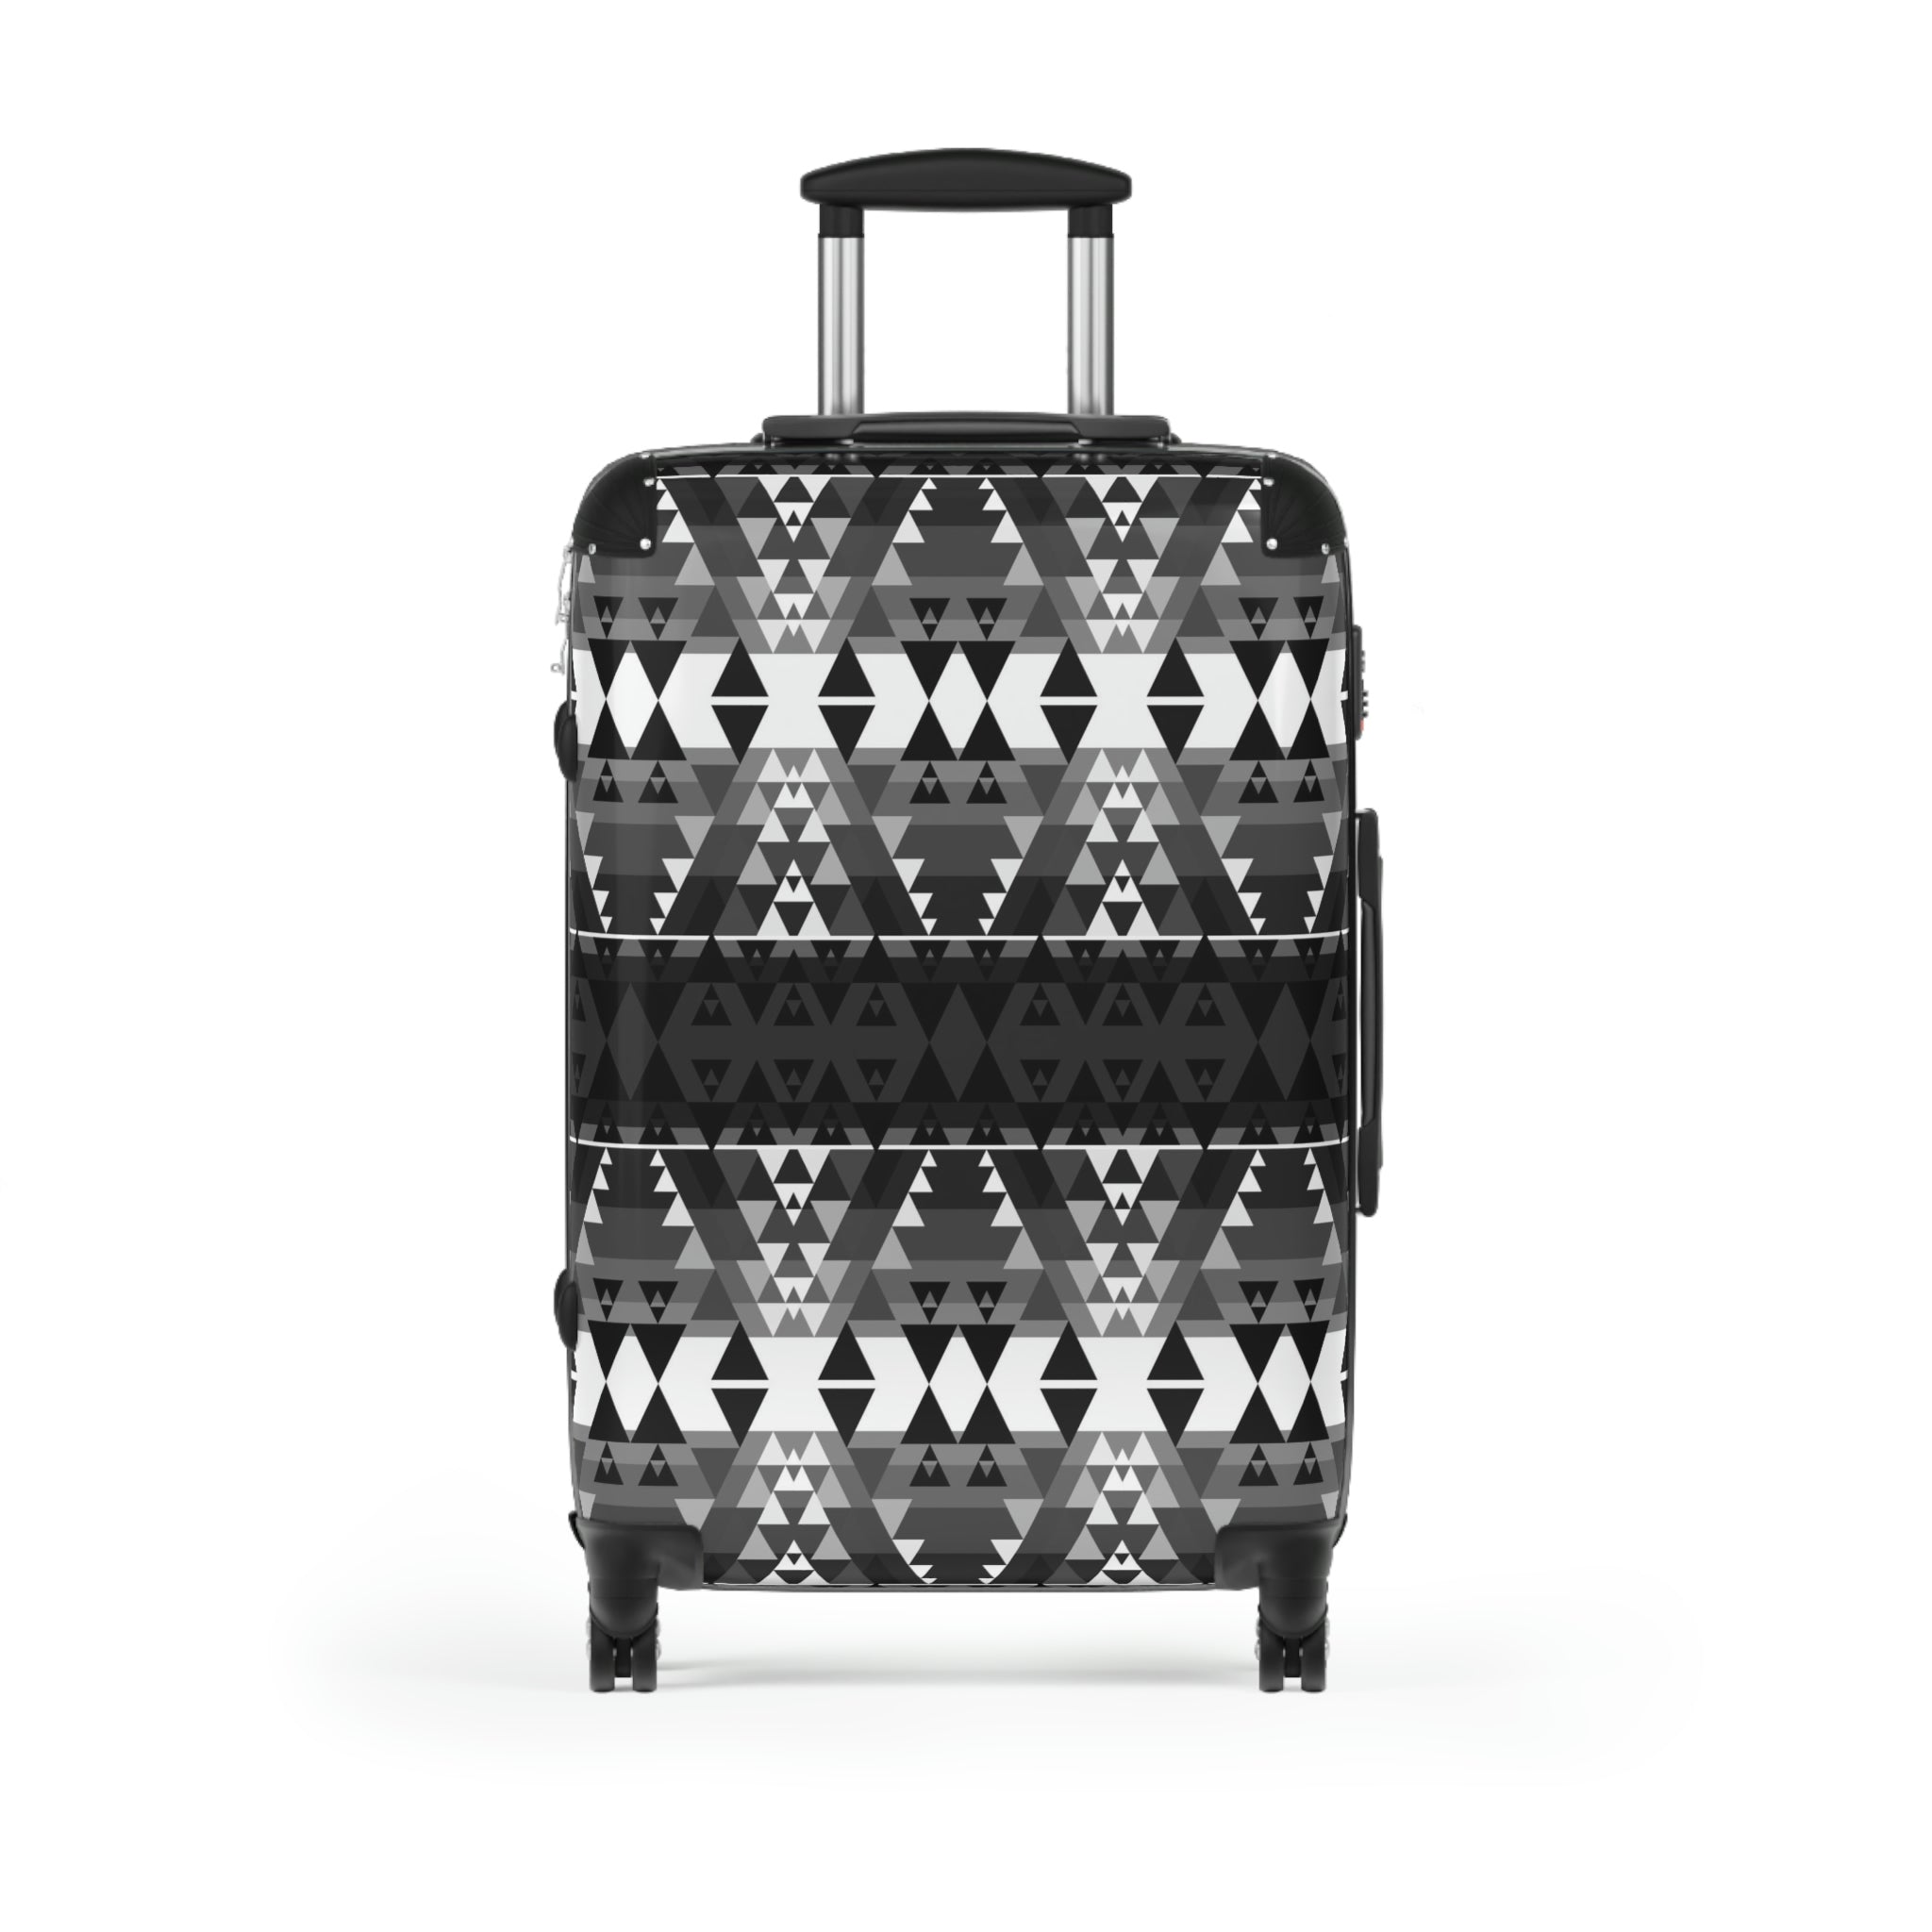 Writing on Stone Black and White Suitcases